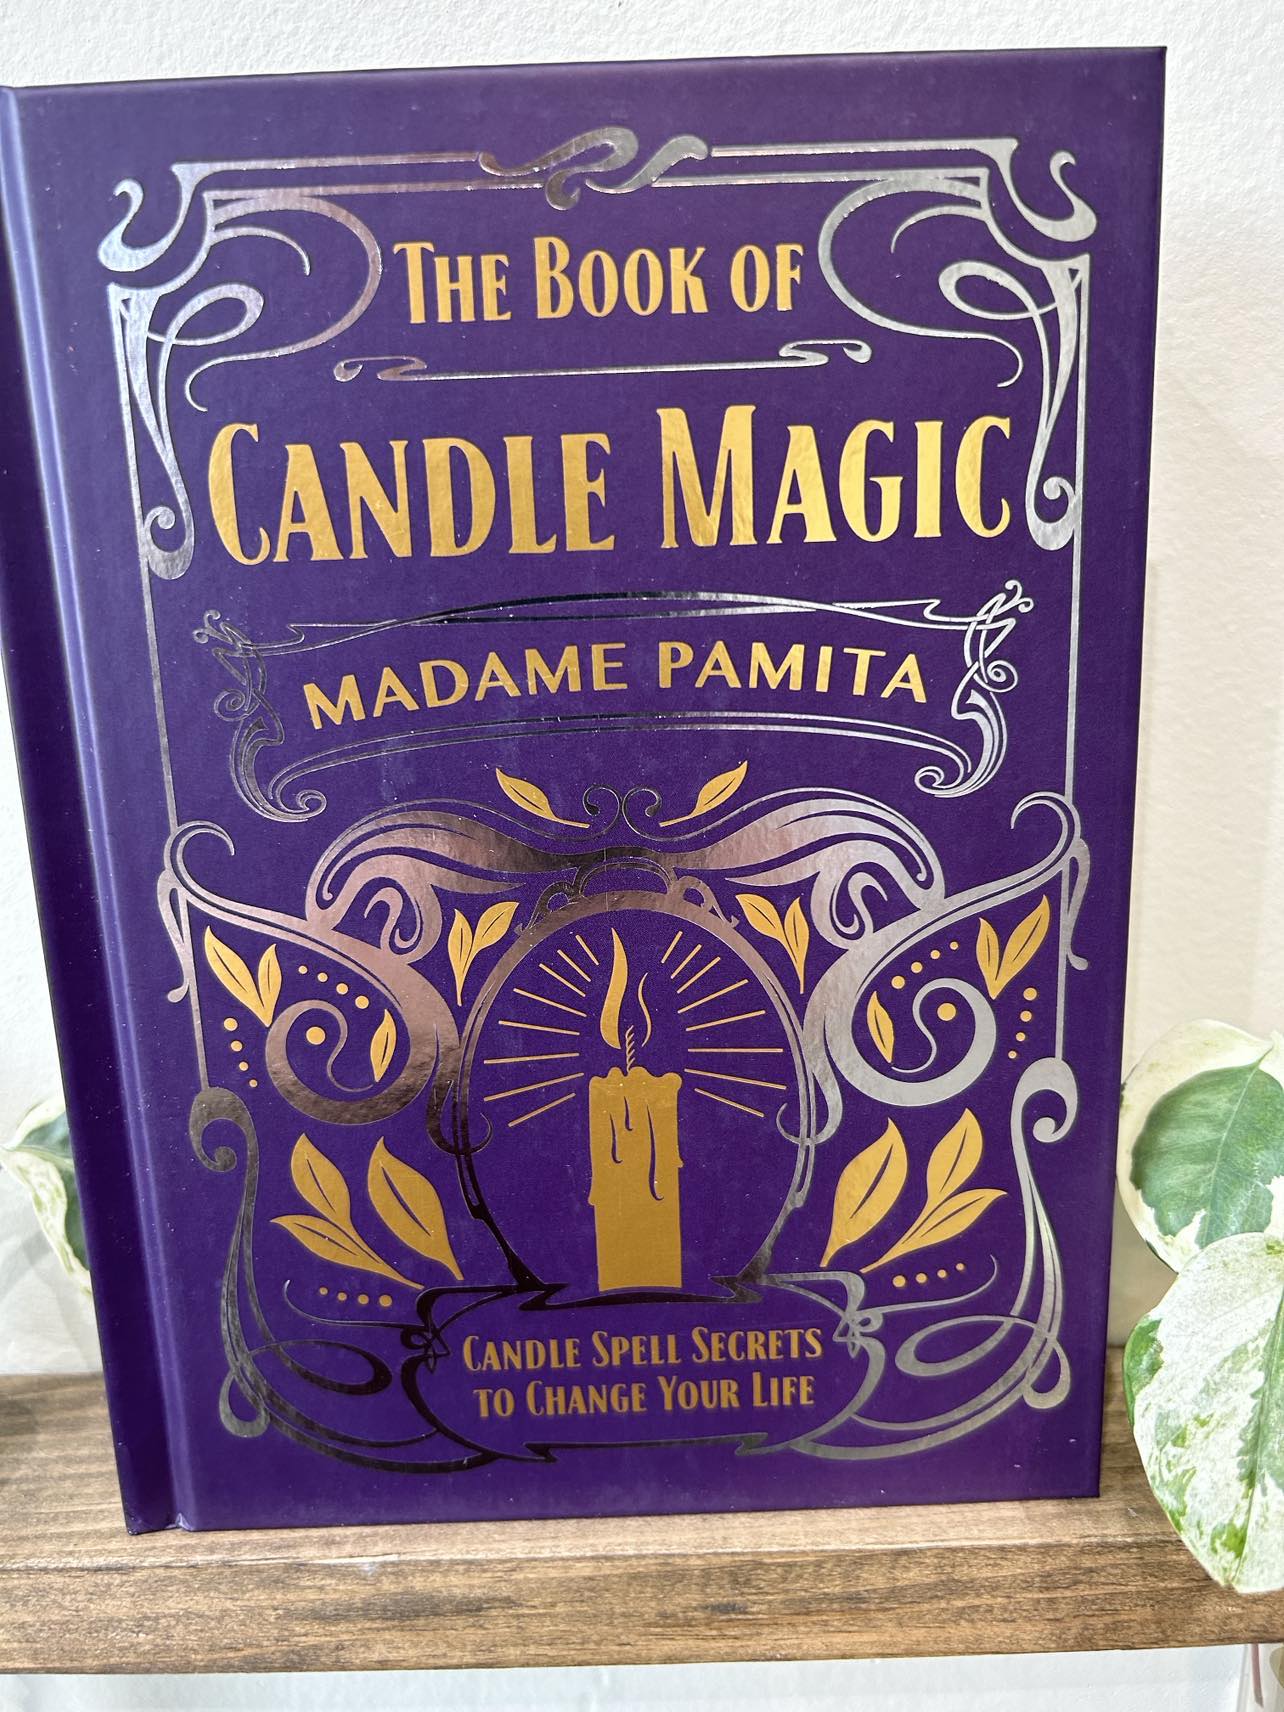 the book of candle magic by madame Pamita